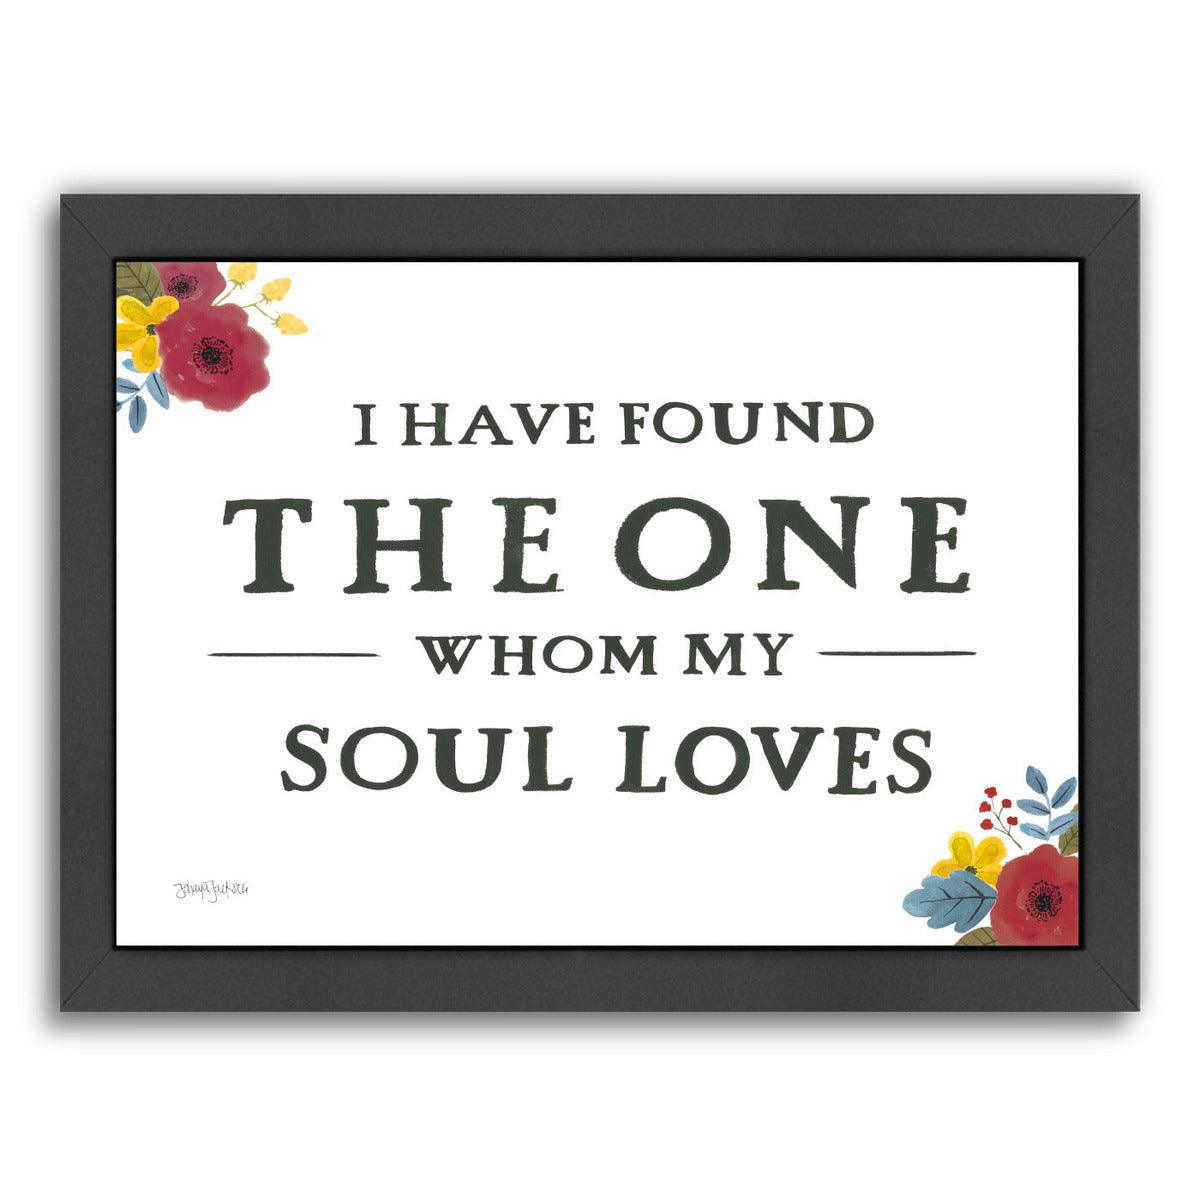 Scripture For Life Vii by Wild Apple Framed Print - Americanflat